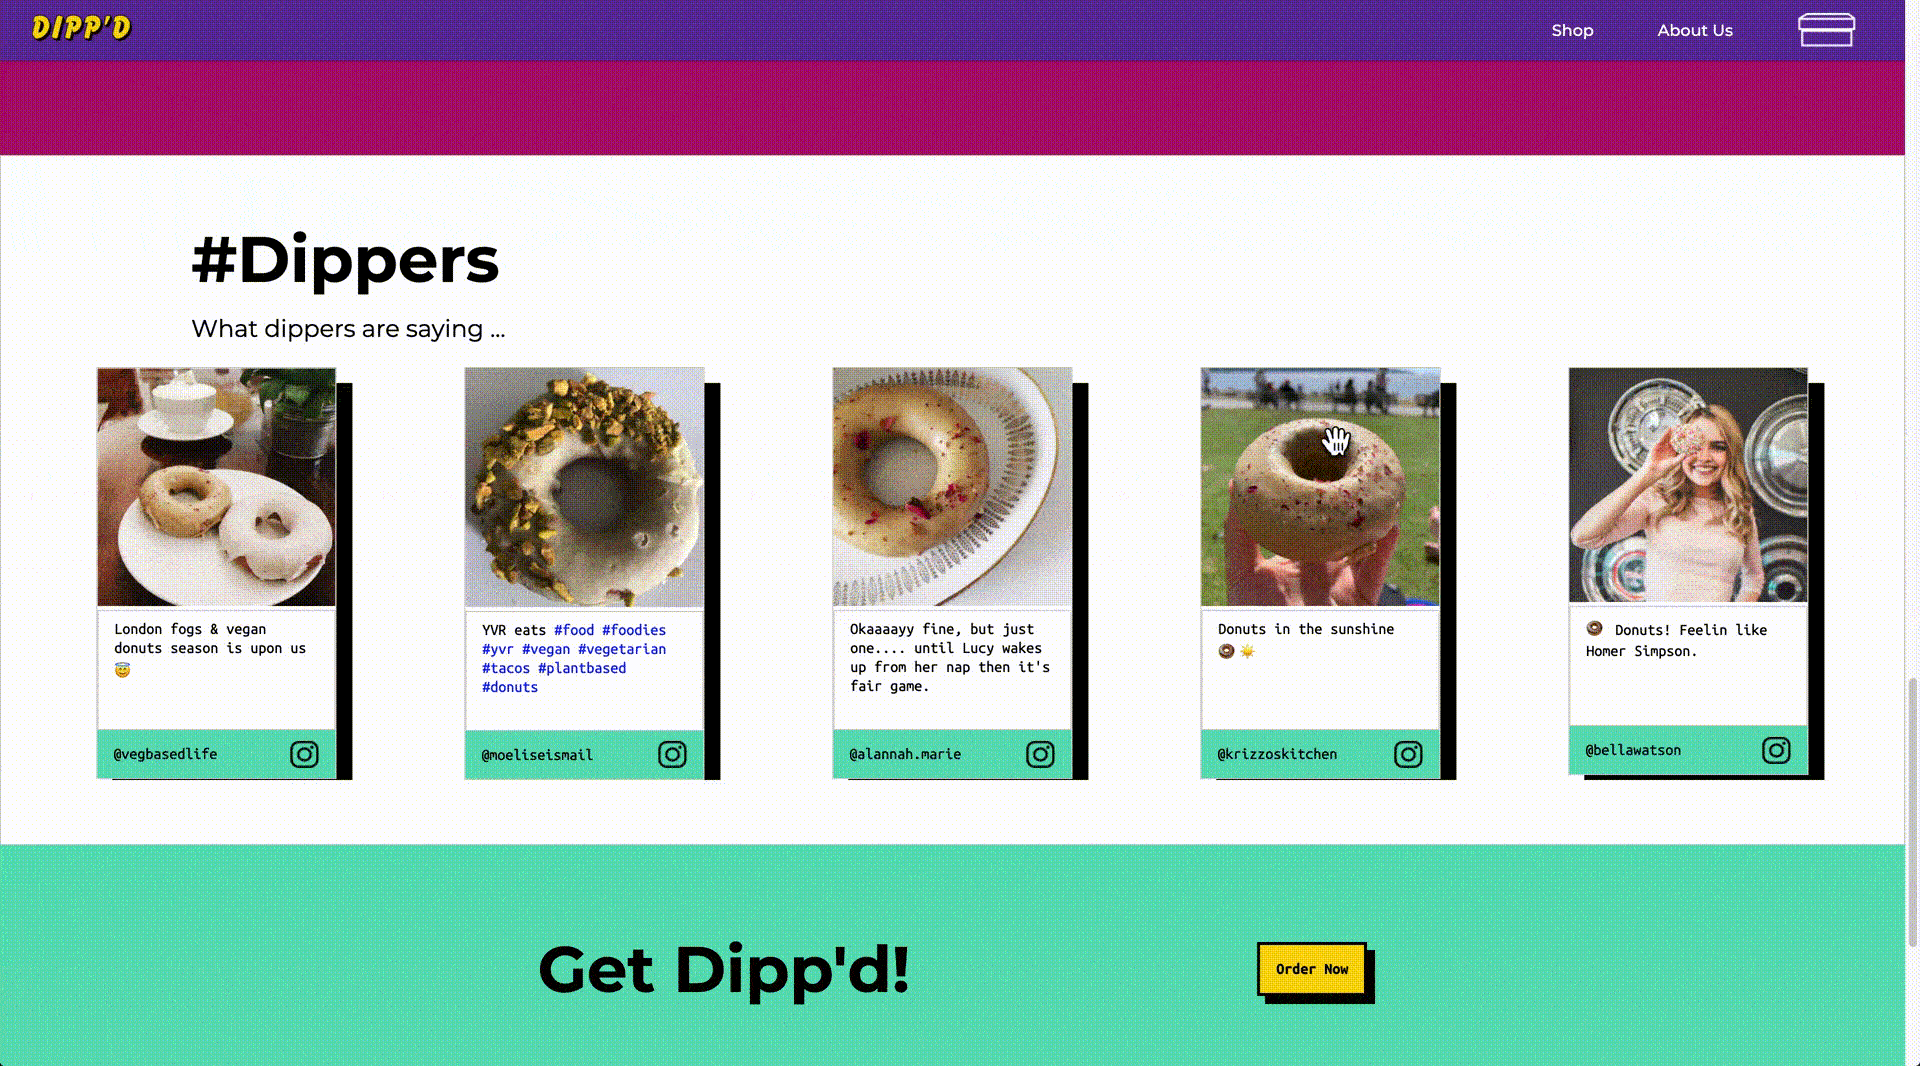 Gif of social media post carousel on Dipp'd home page